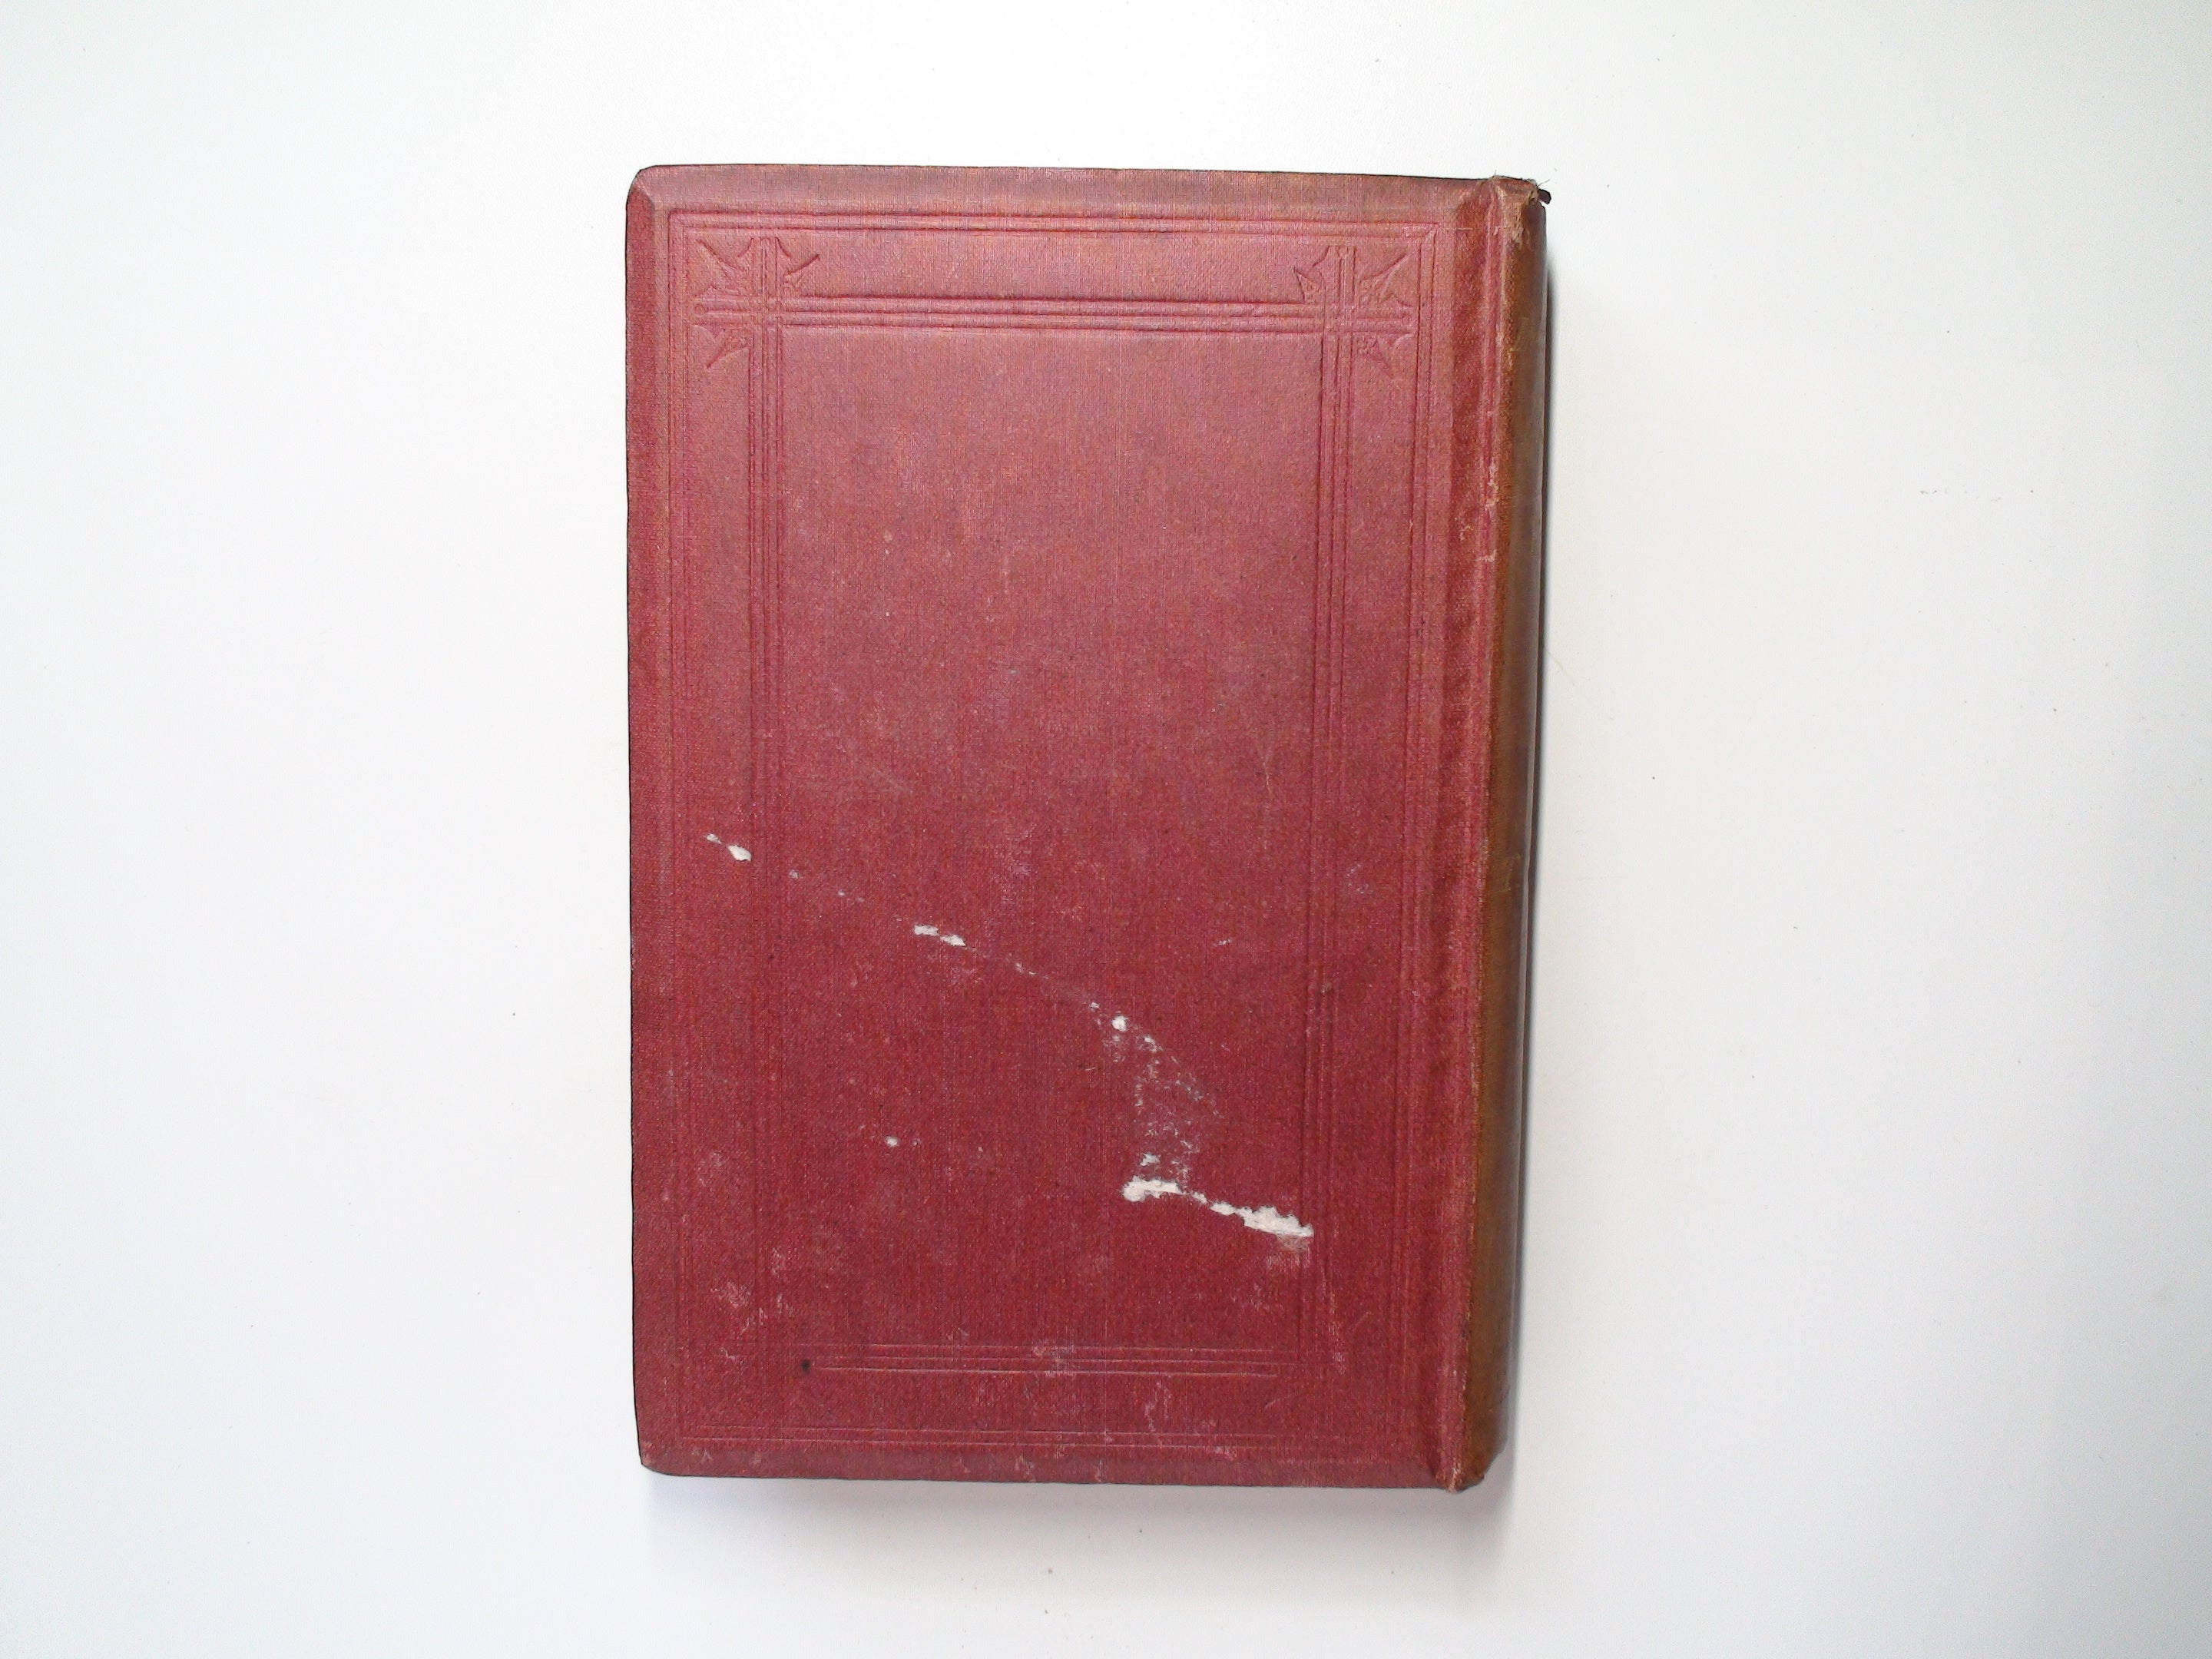 Critical and Miscellaneous Essays, by Thomas Carlyle, Vol II ONLY, 1869